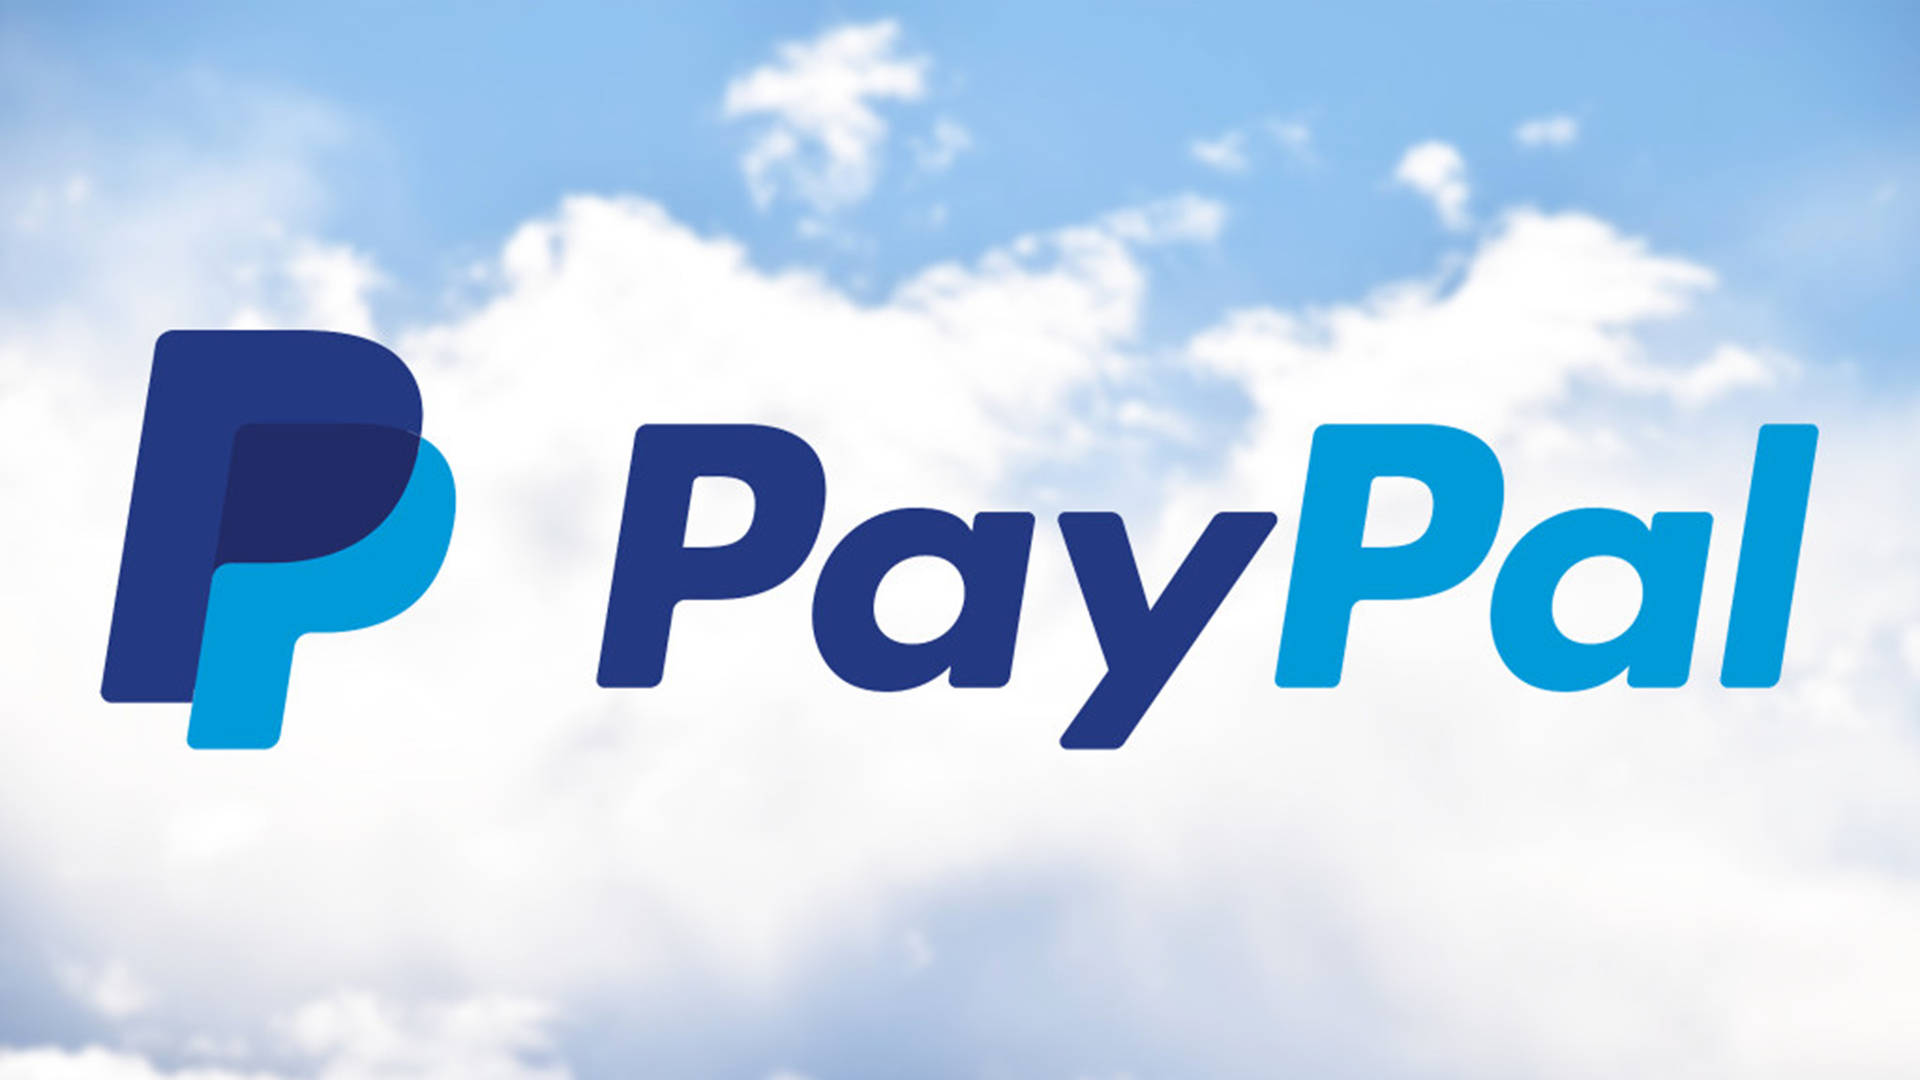 Paypal Logo With Clouds